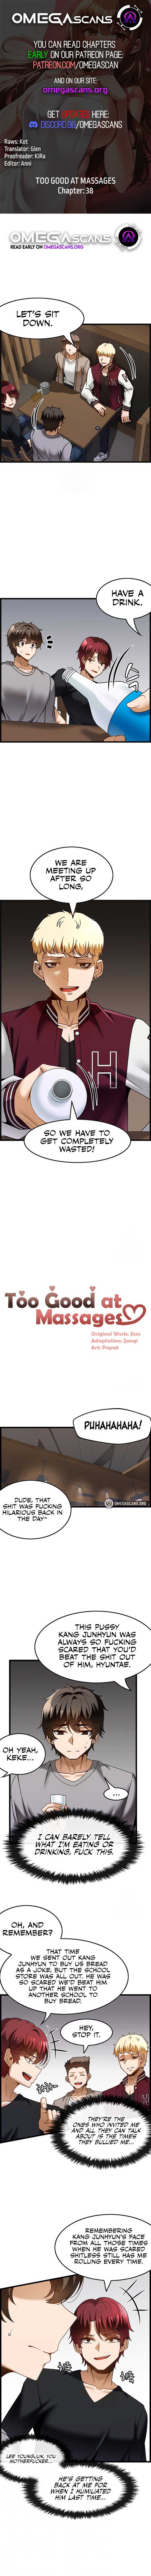 Too Good At Massages NEW image